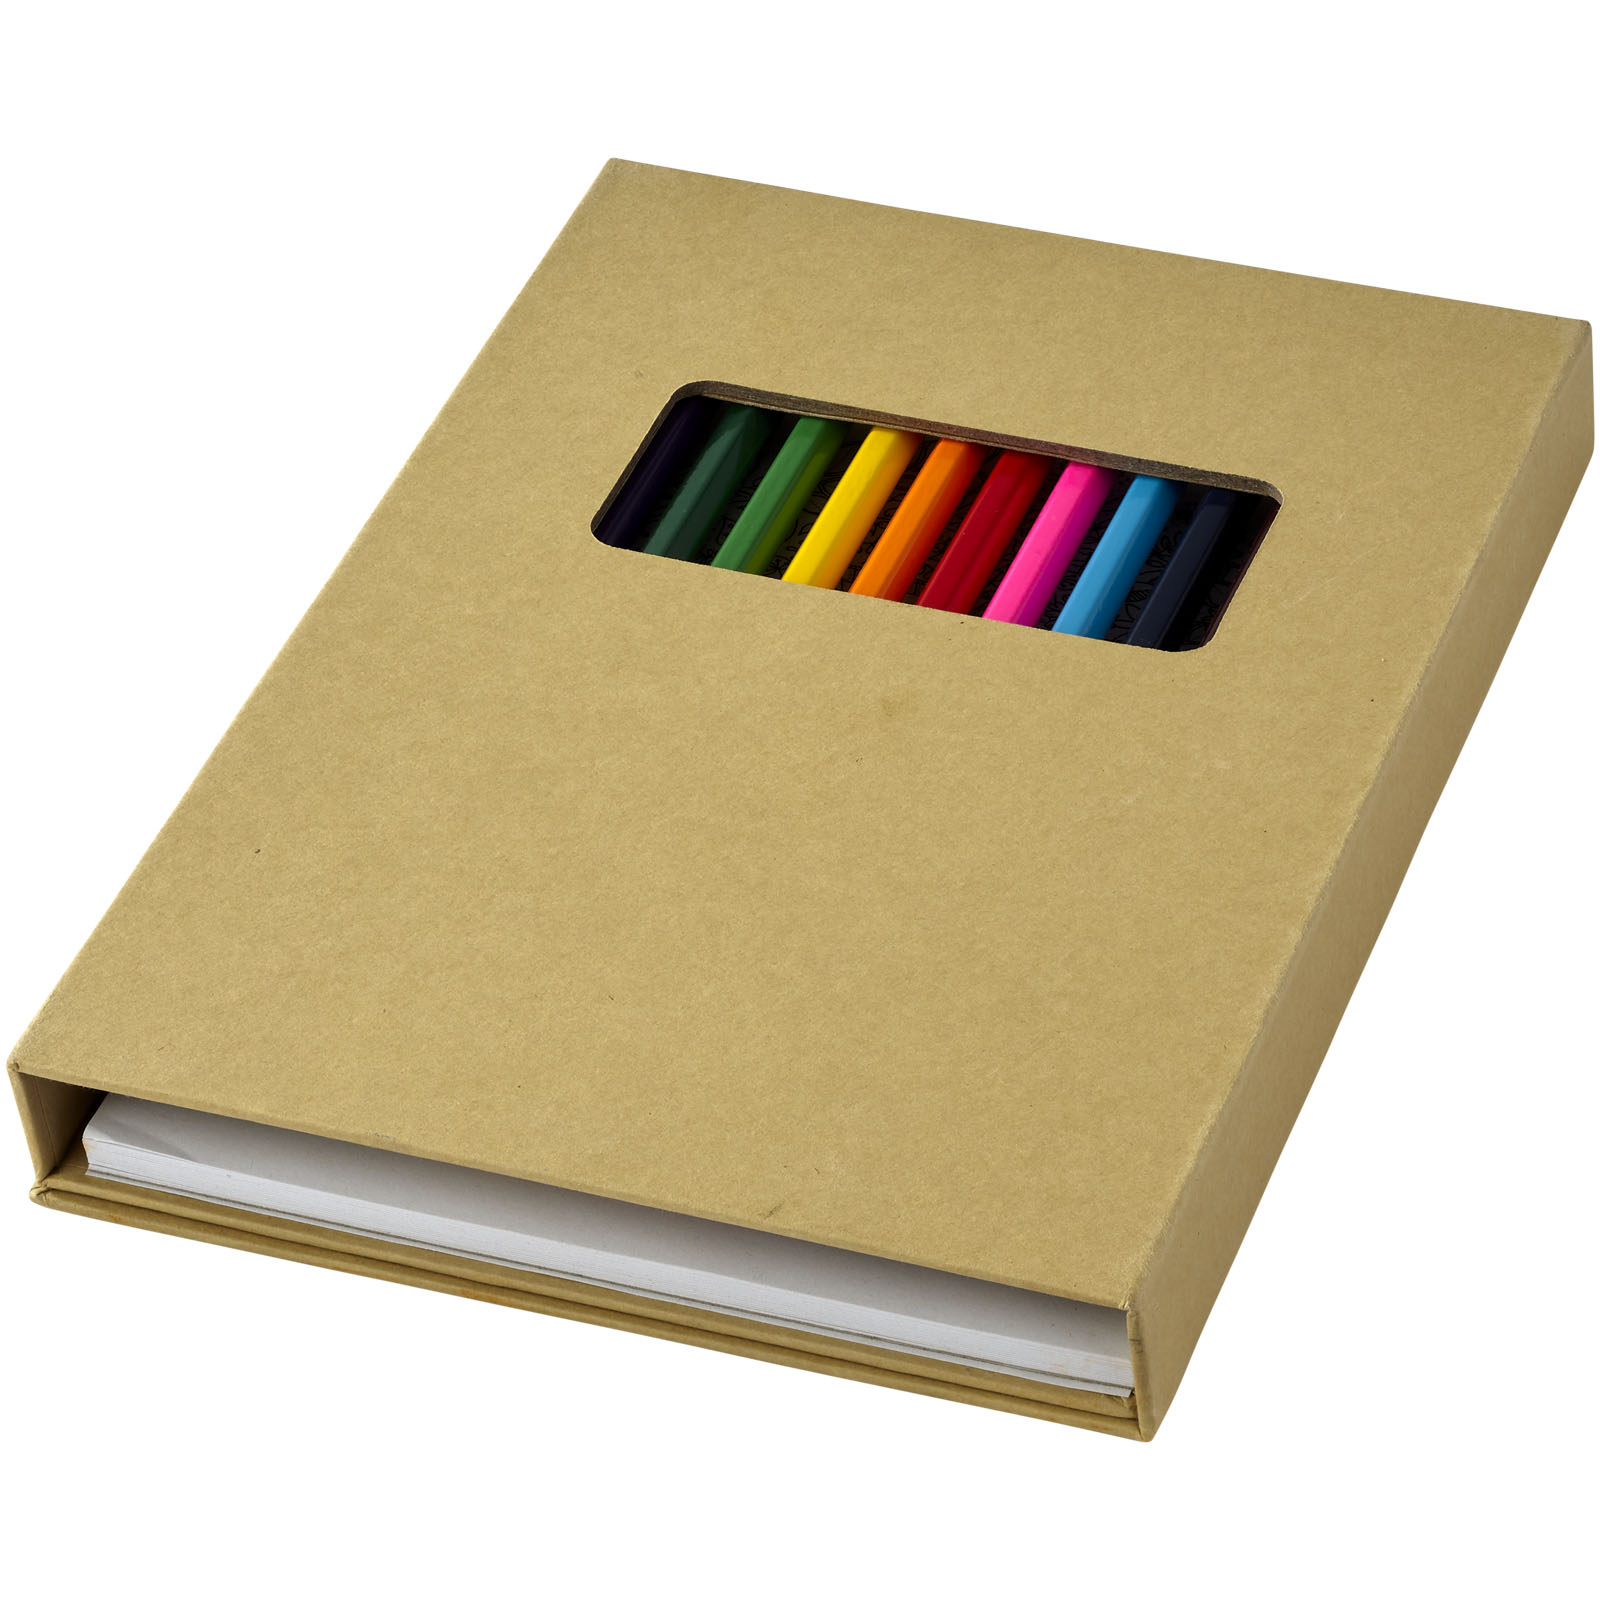 Coloured Pencils and Coloring Pages Set - Maldon